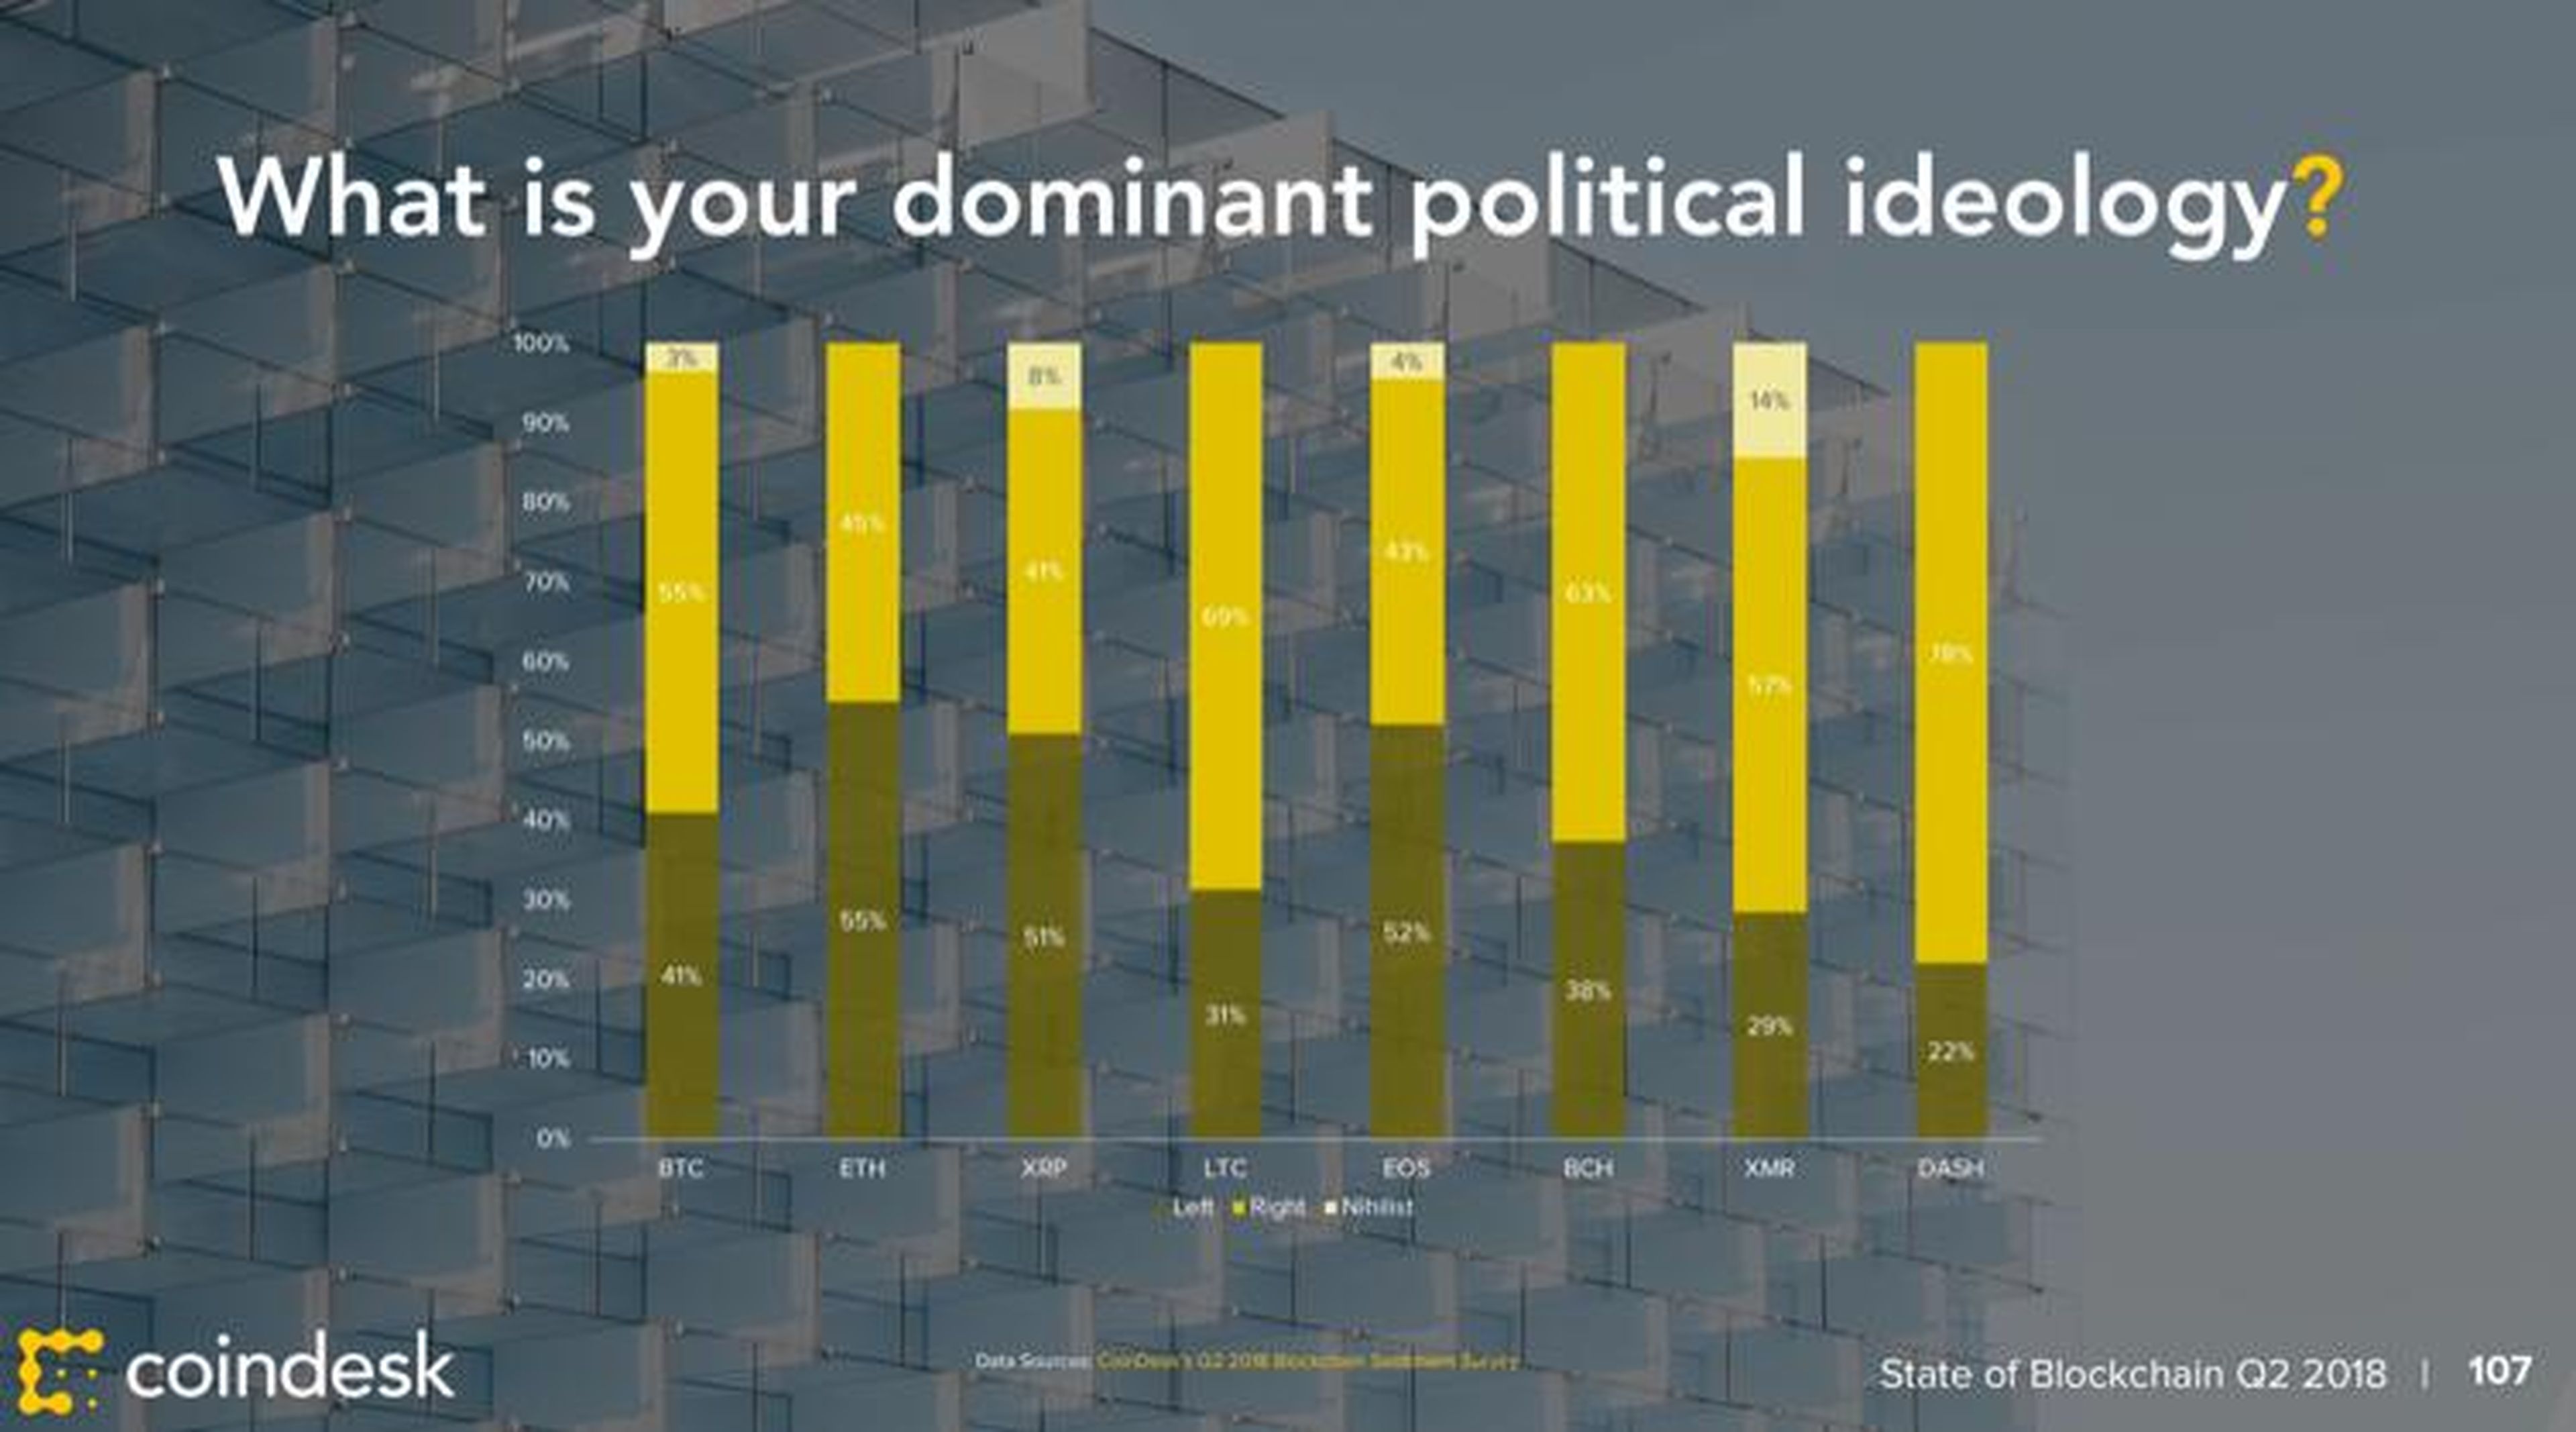 CoinDesk surveyed 1,200 crypto investors and found their dominant political ideology may not be what you think